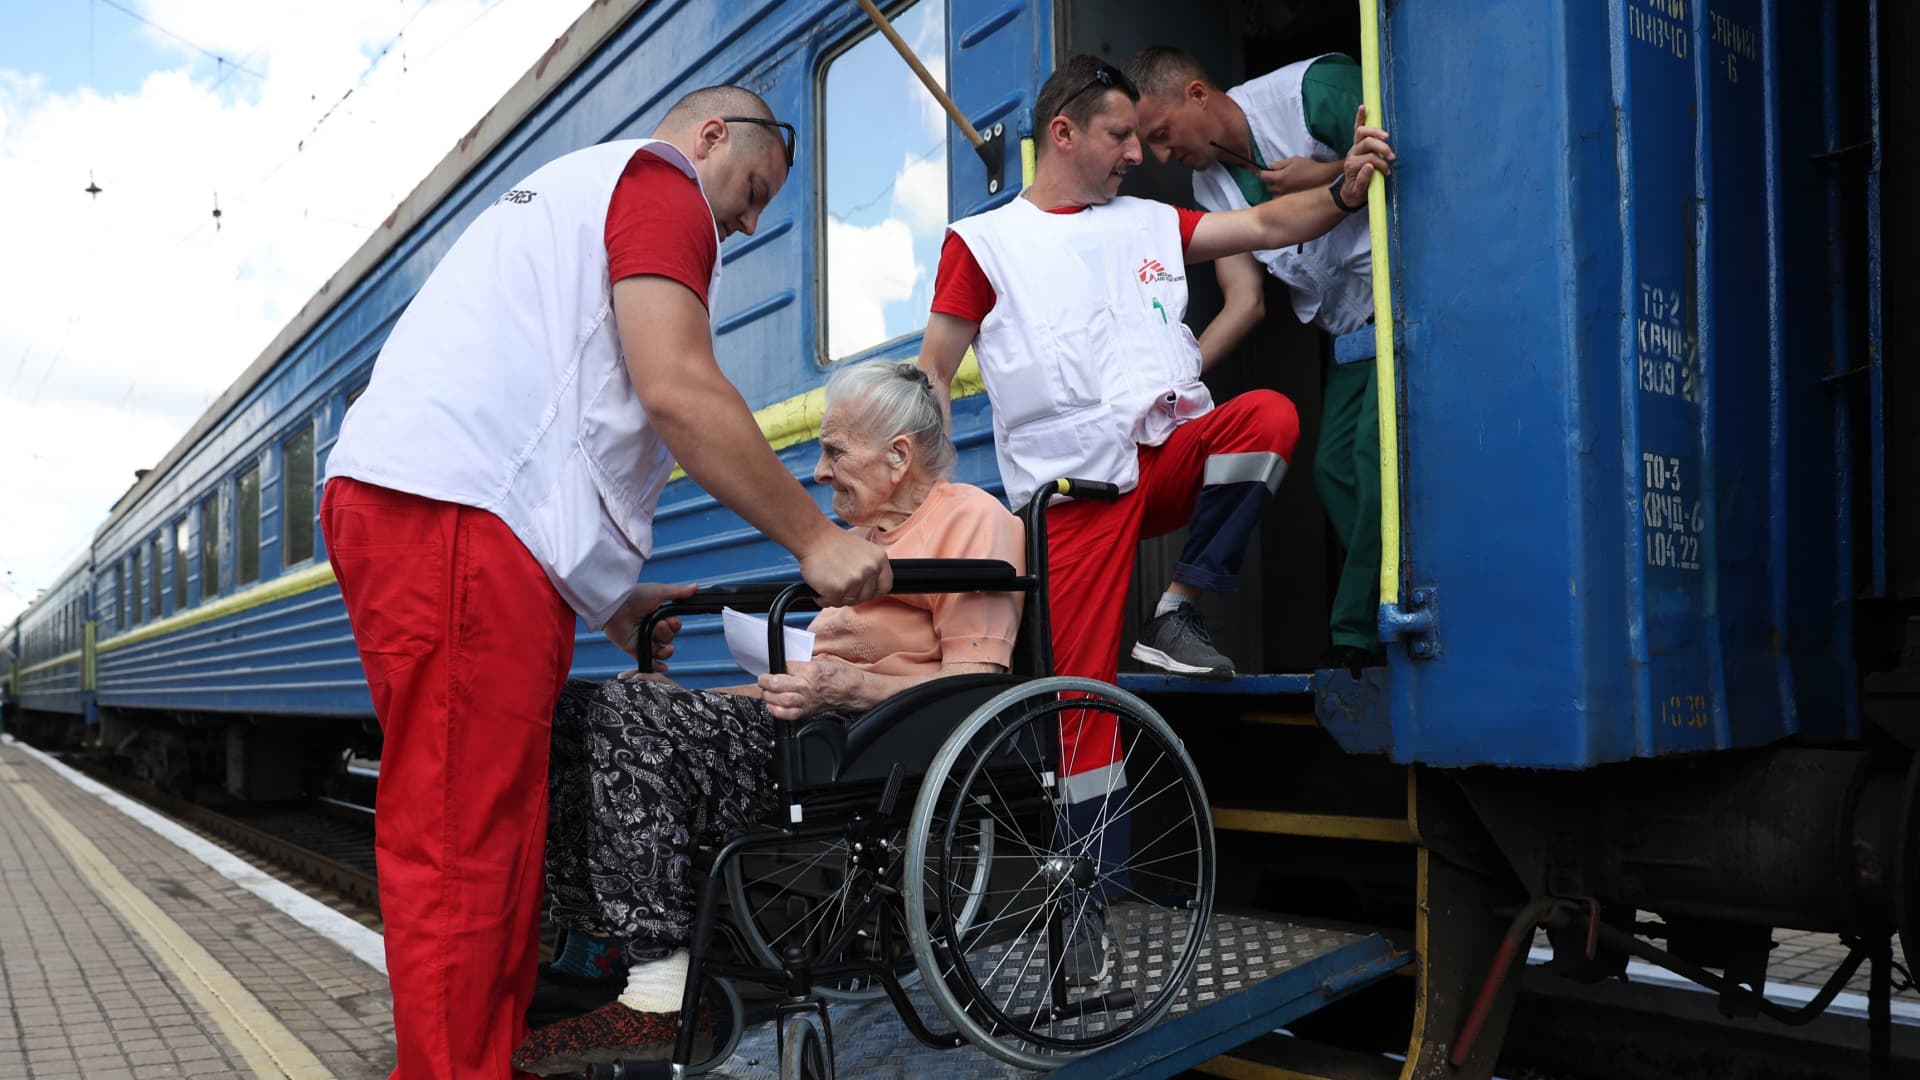 Employees of the Red Cross and Doctors Without Borders organisations take part in the evacuation by train of pensioners with heavy diseases from different settlements located close to the front line, at the railway station in Pokrovsk, Donetsk region, on July 18, 2022.